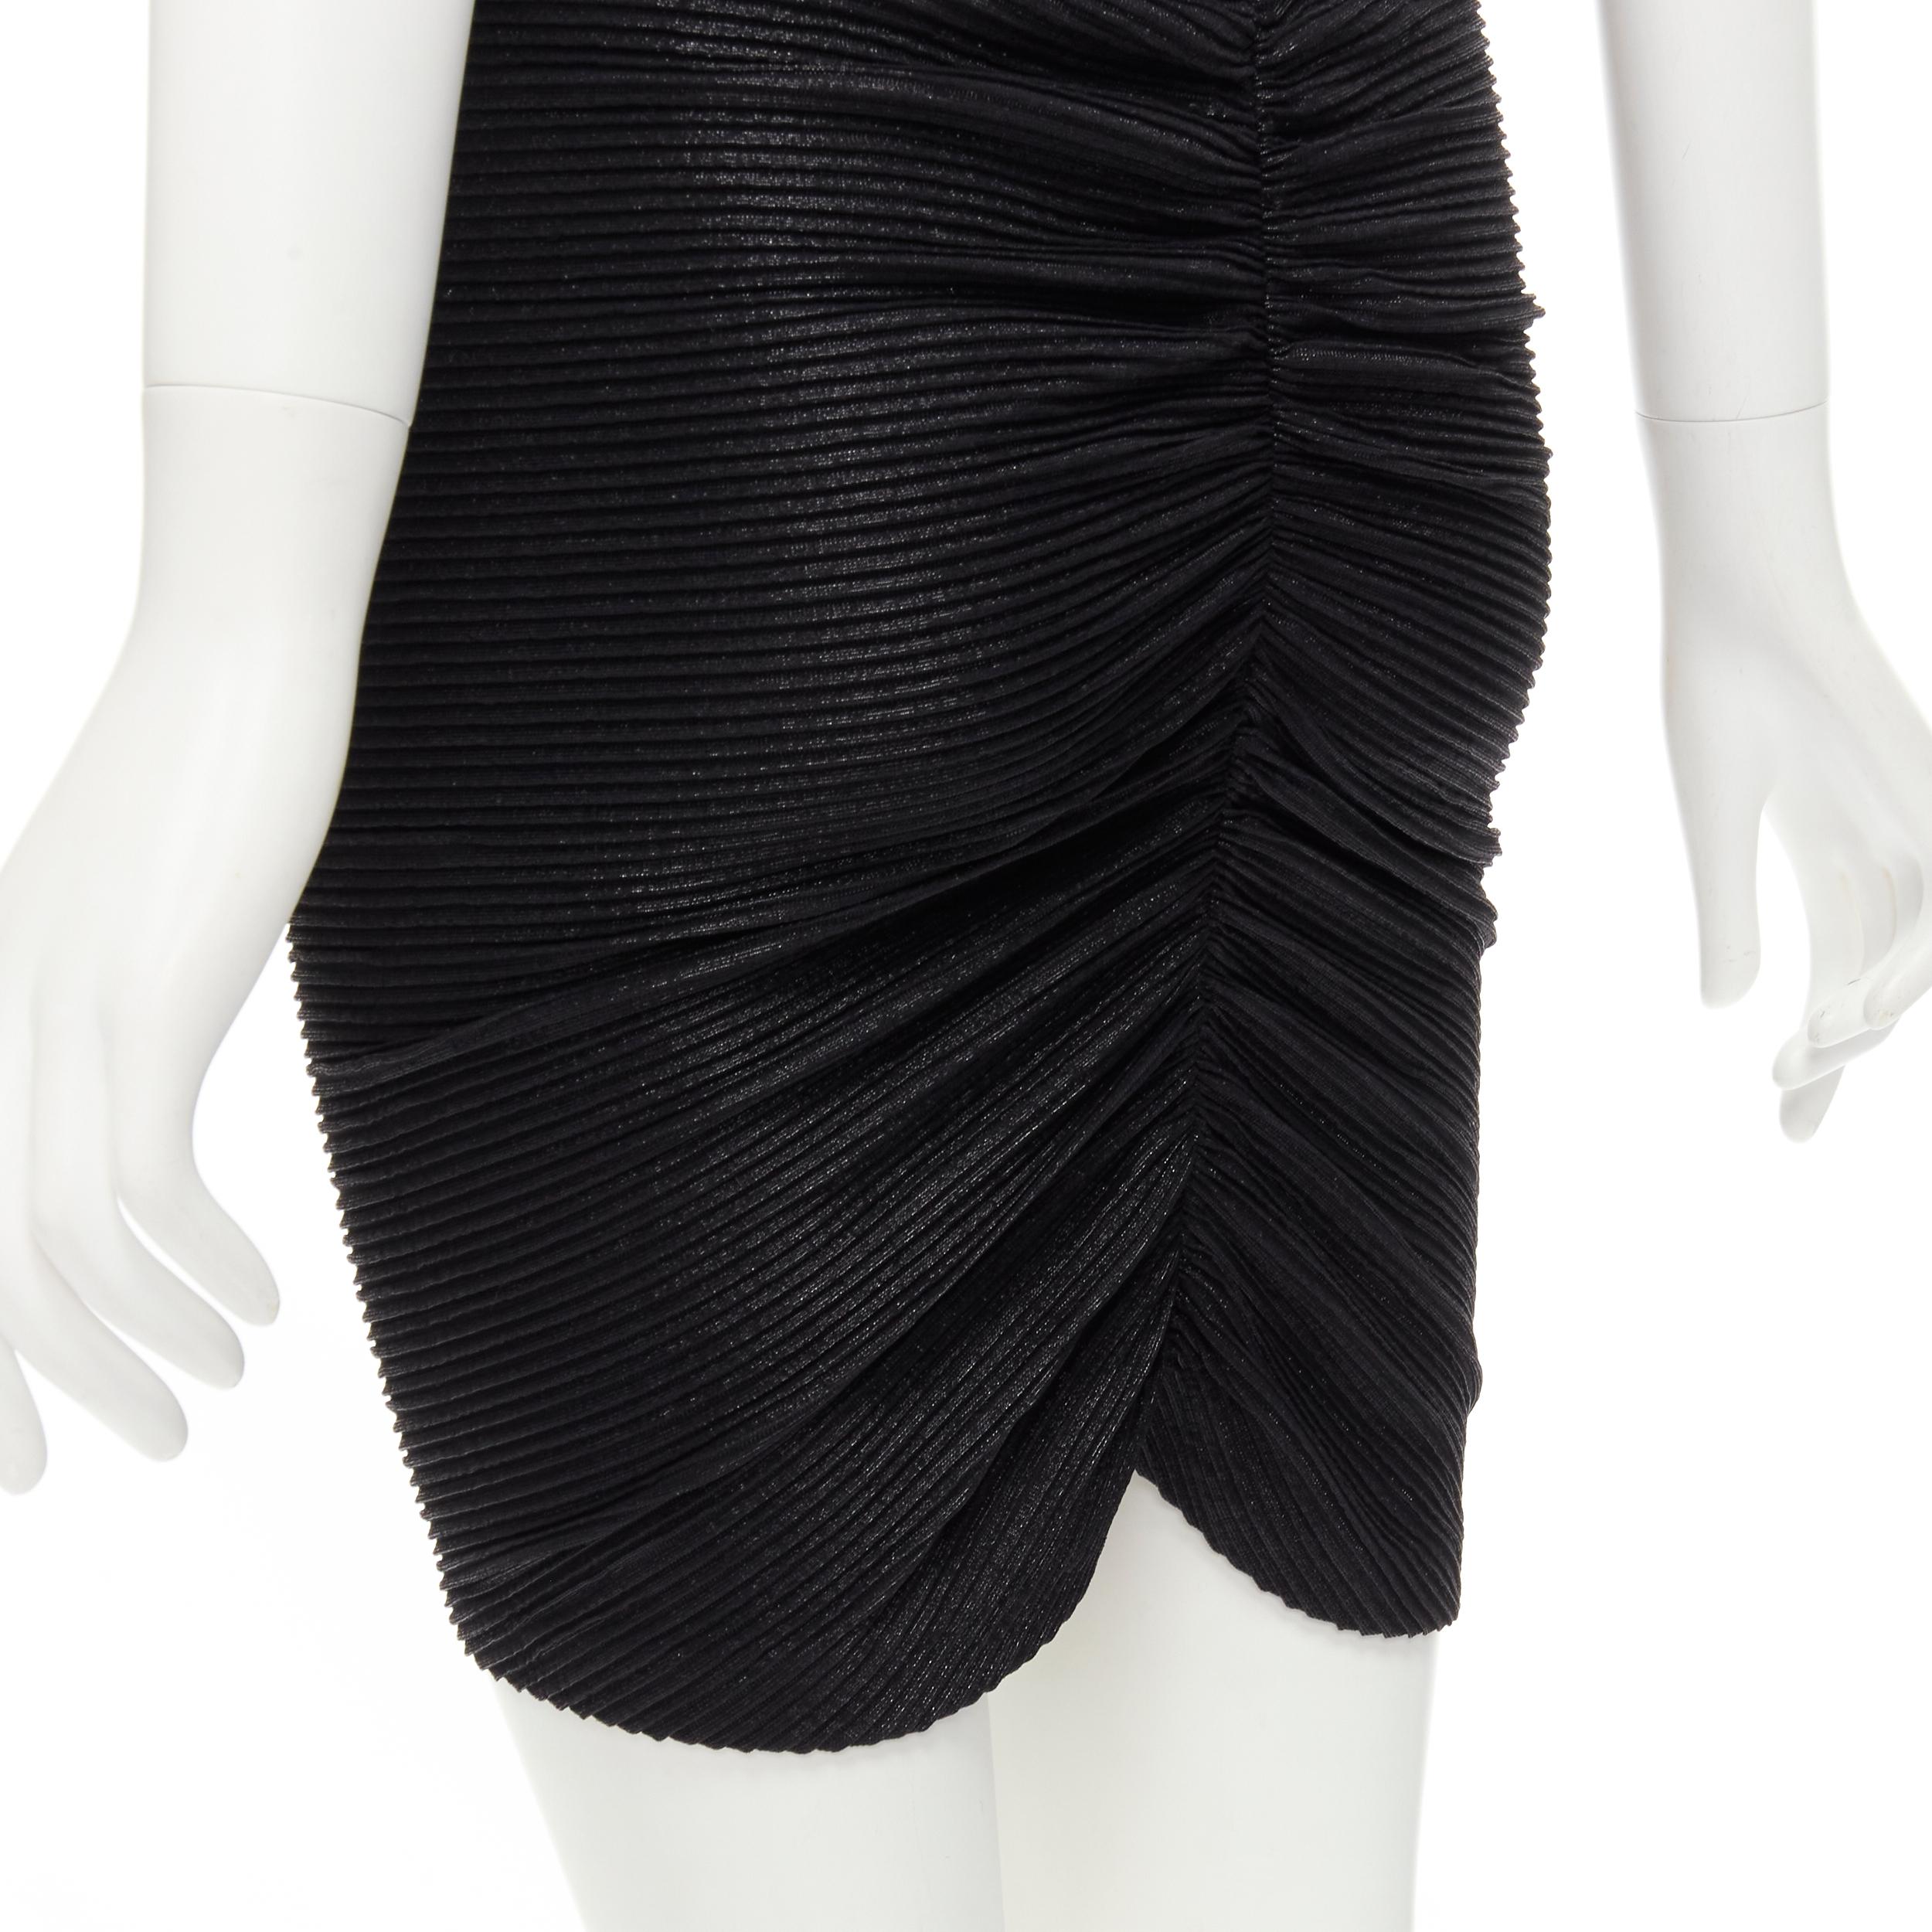 LA PERLA Vintage black lurex pleated open ruched back mini dress IT44 M 
Reference: GIYG/A00149 
Brand: La Perla 
Material: Nylon 
Color: Black 
Pattern: Solid 
Extra Detail: Metallic sheen pleated fabrication. V open back. Ruching at centre back